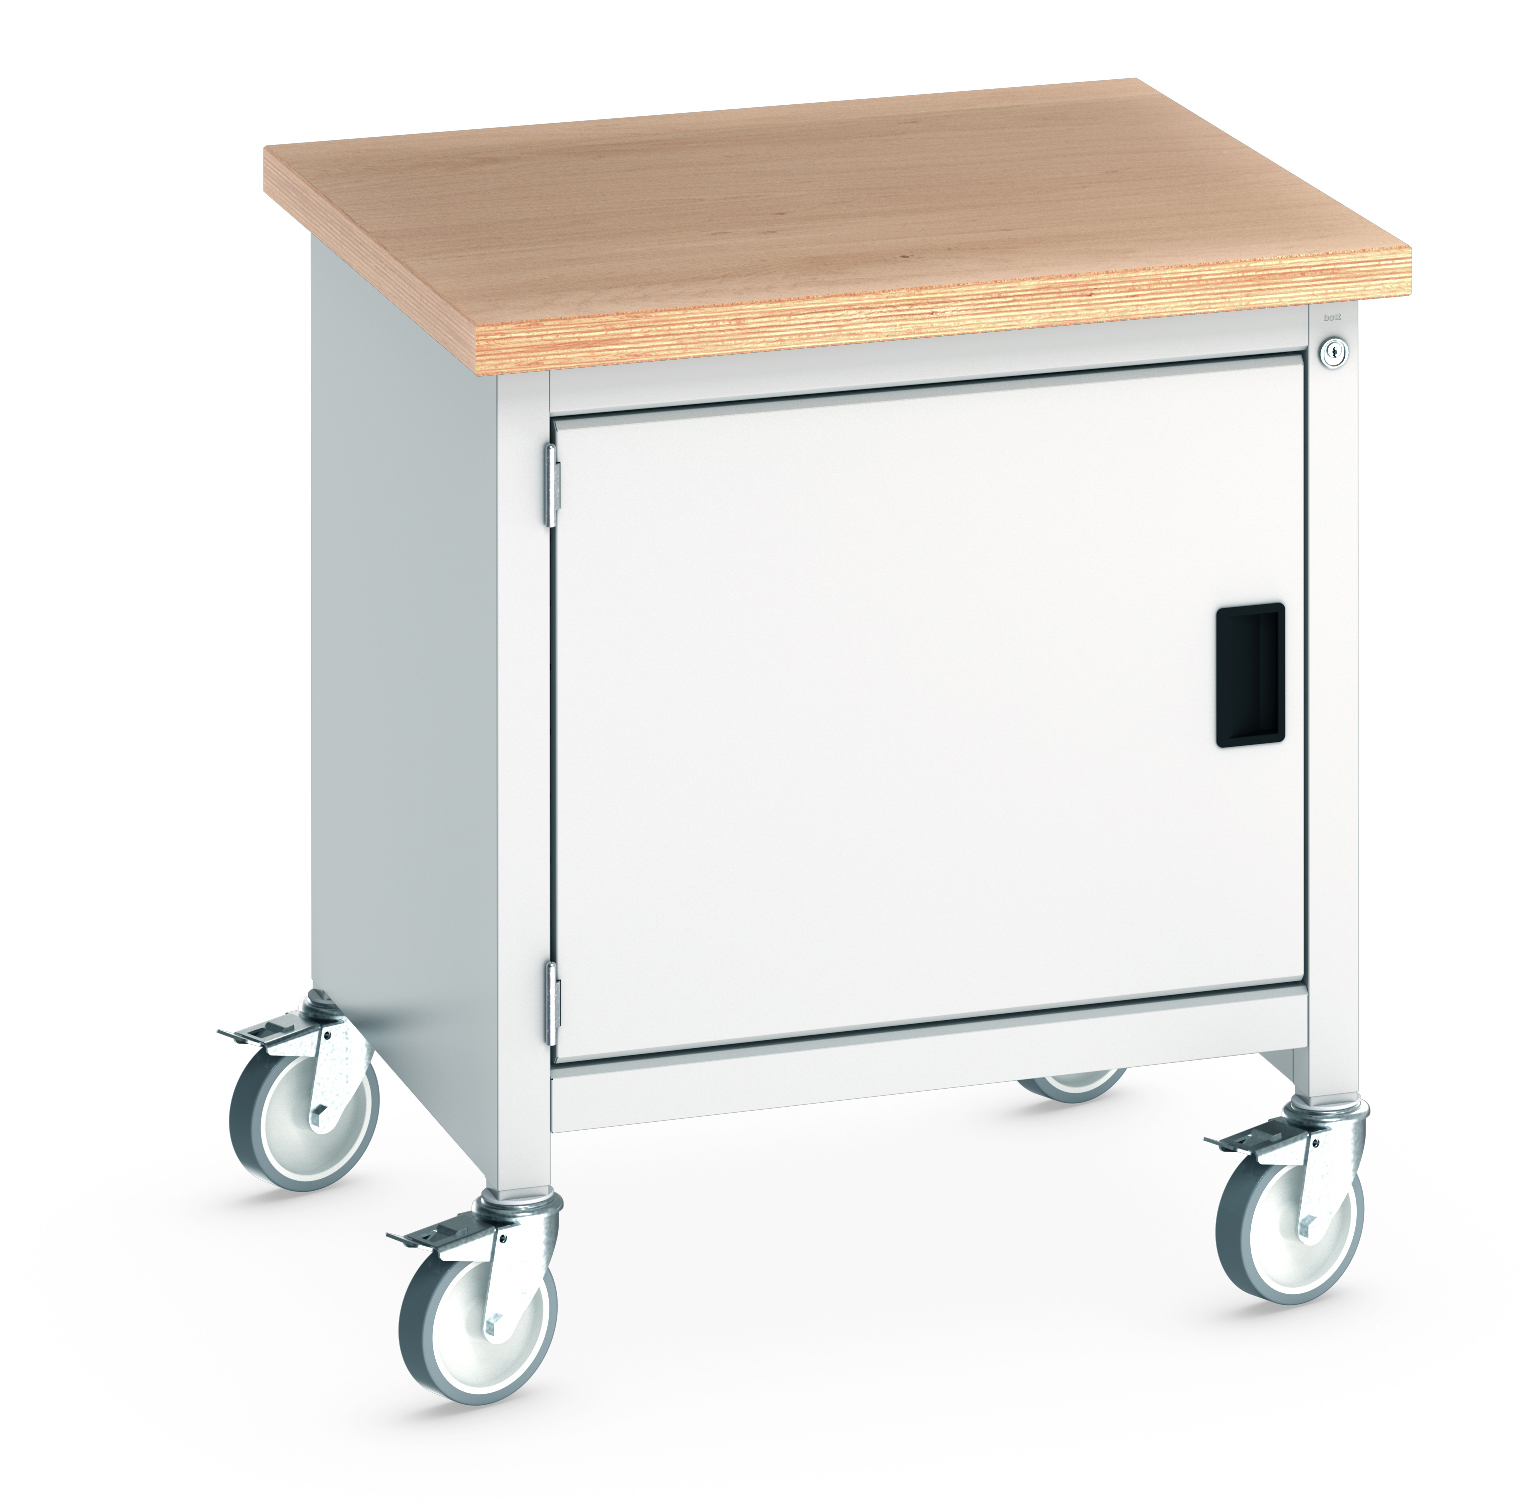 Bott Cubio Mobile Storage Bench With Full Cupboard - 41002085.16V